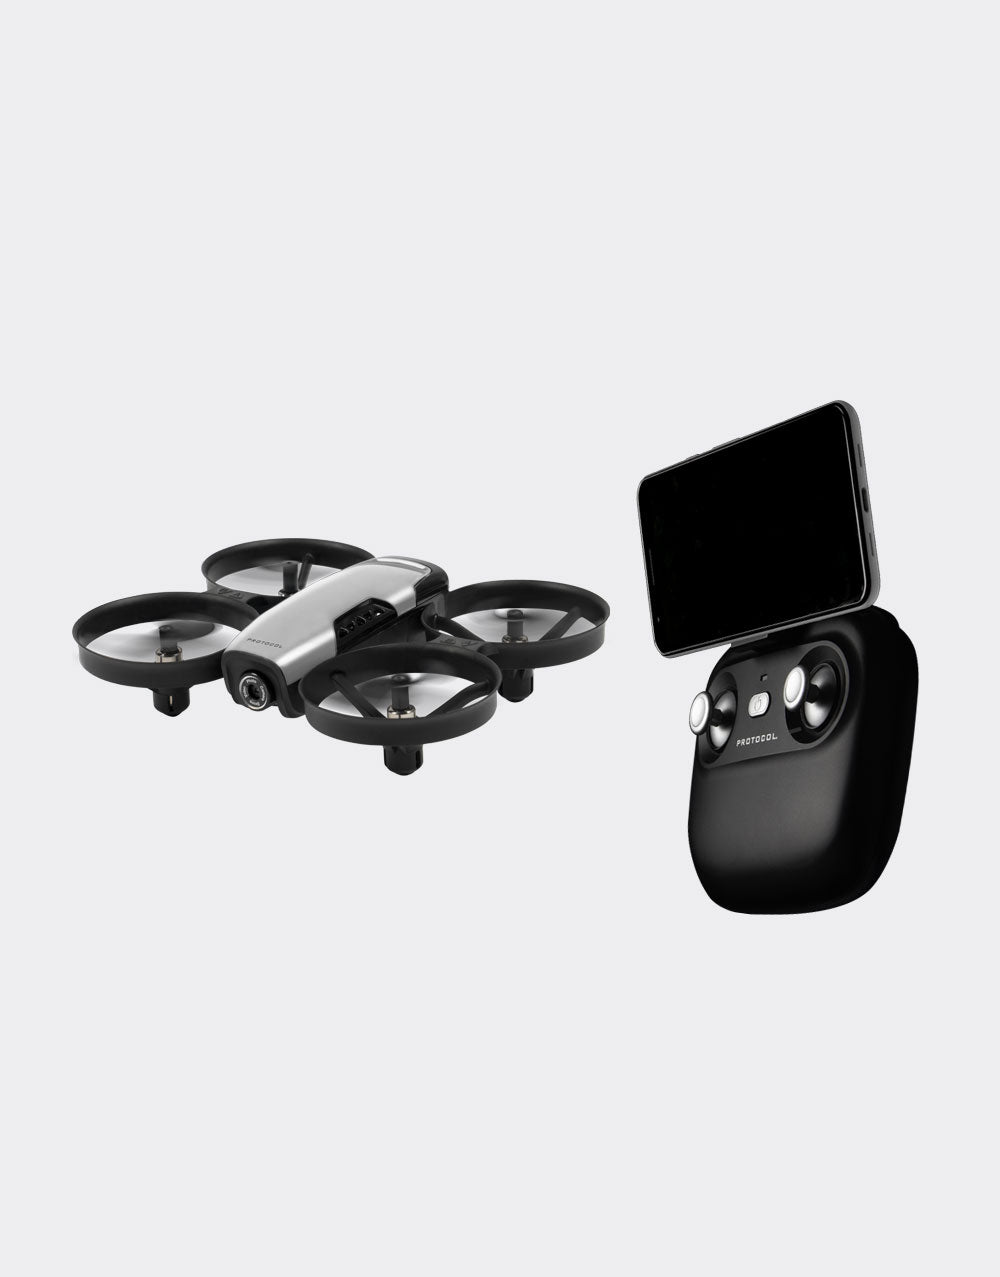 Neo-Drone Wifi Drone with Live Streaming Camera